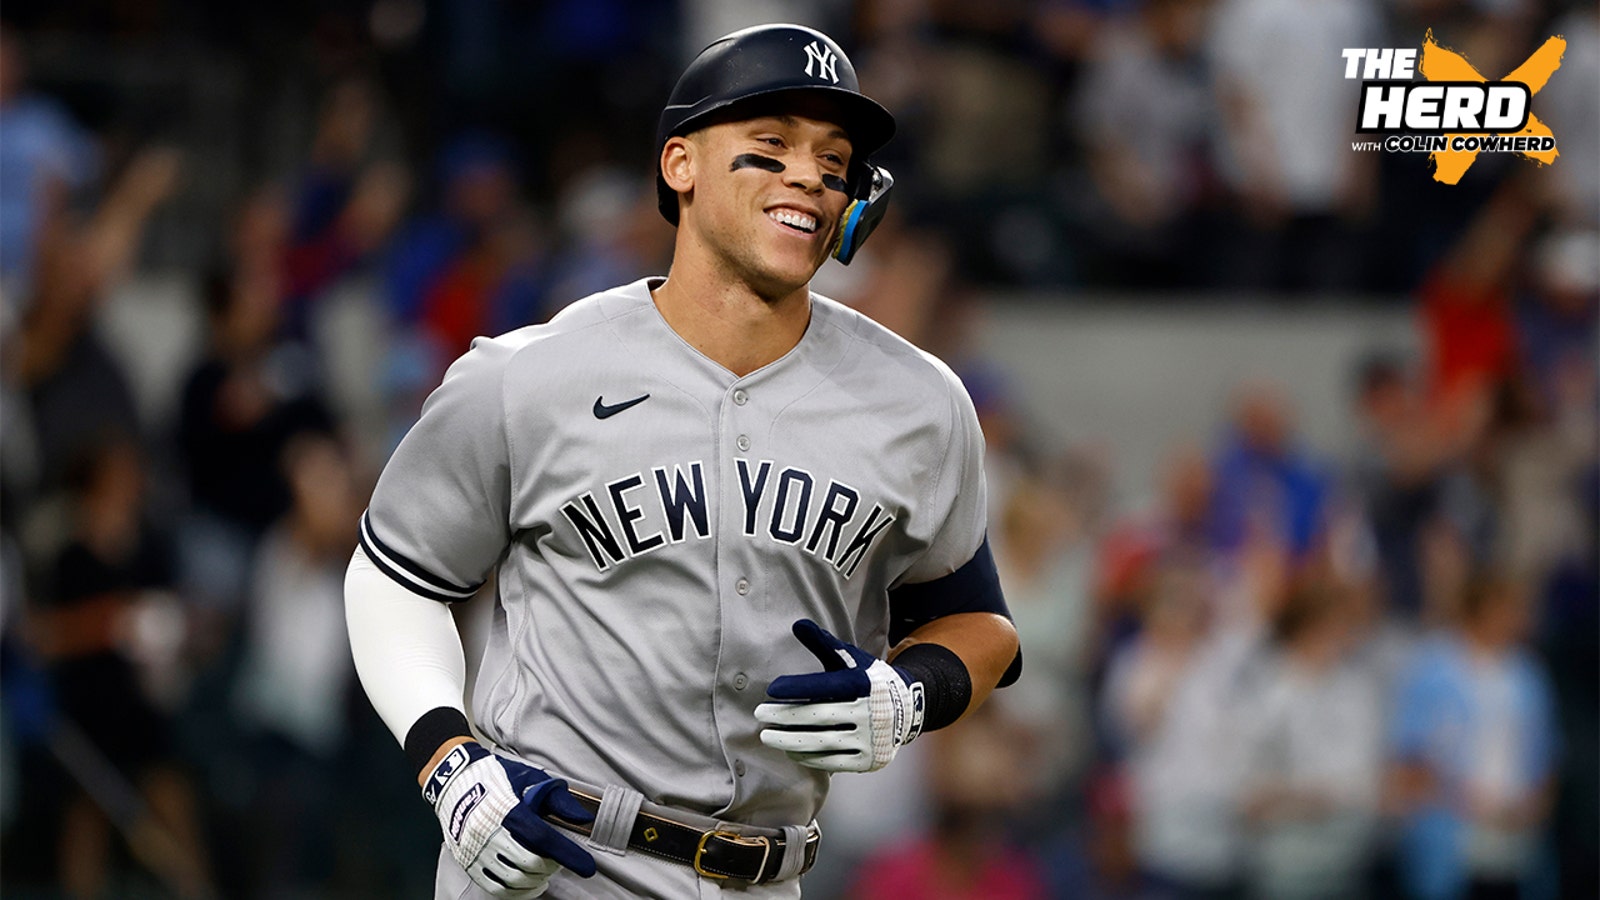 Aaron Judge passes Roger Maris with 62nd home run